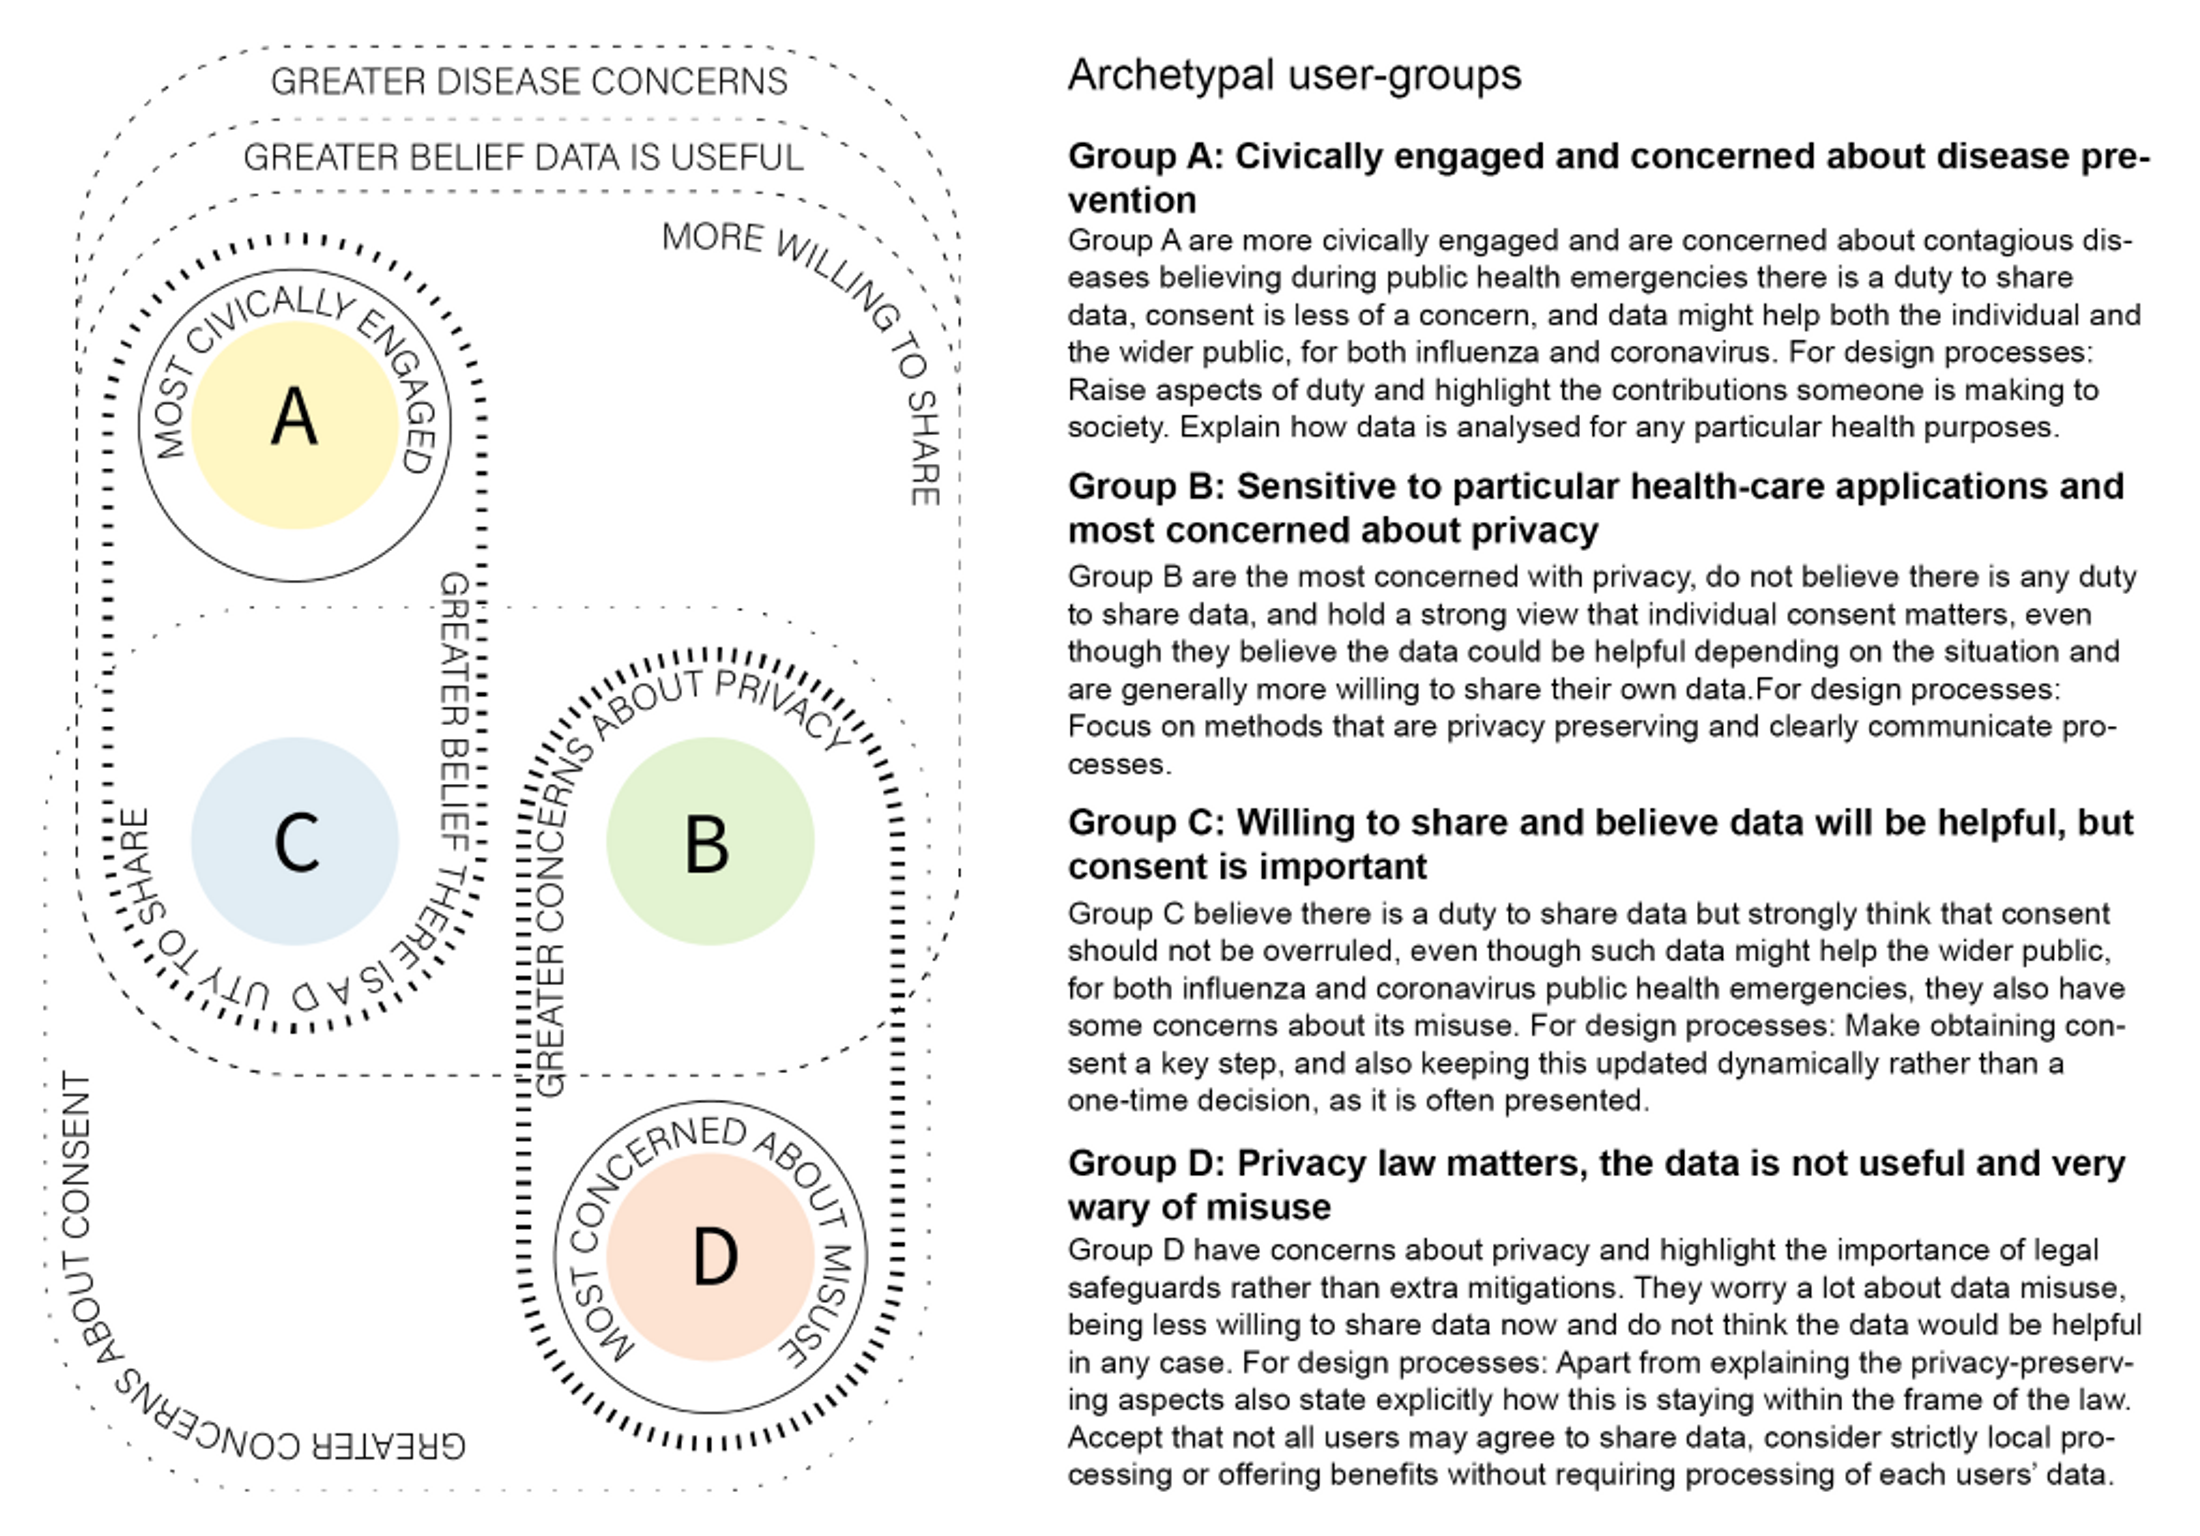 Clusters of participant properties leading to the definition of four archetypal user-groups